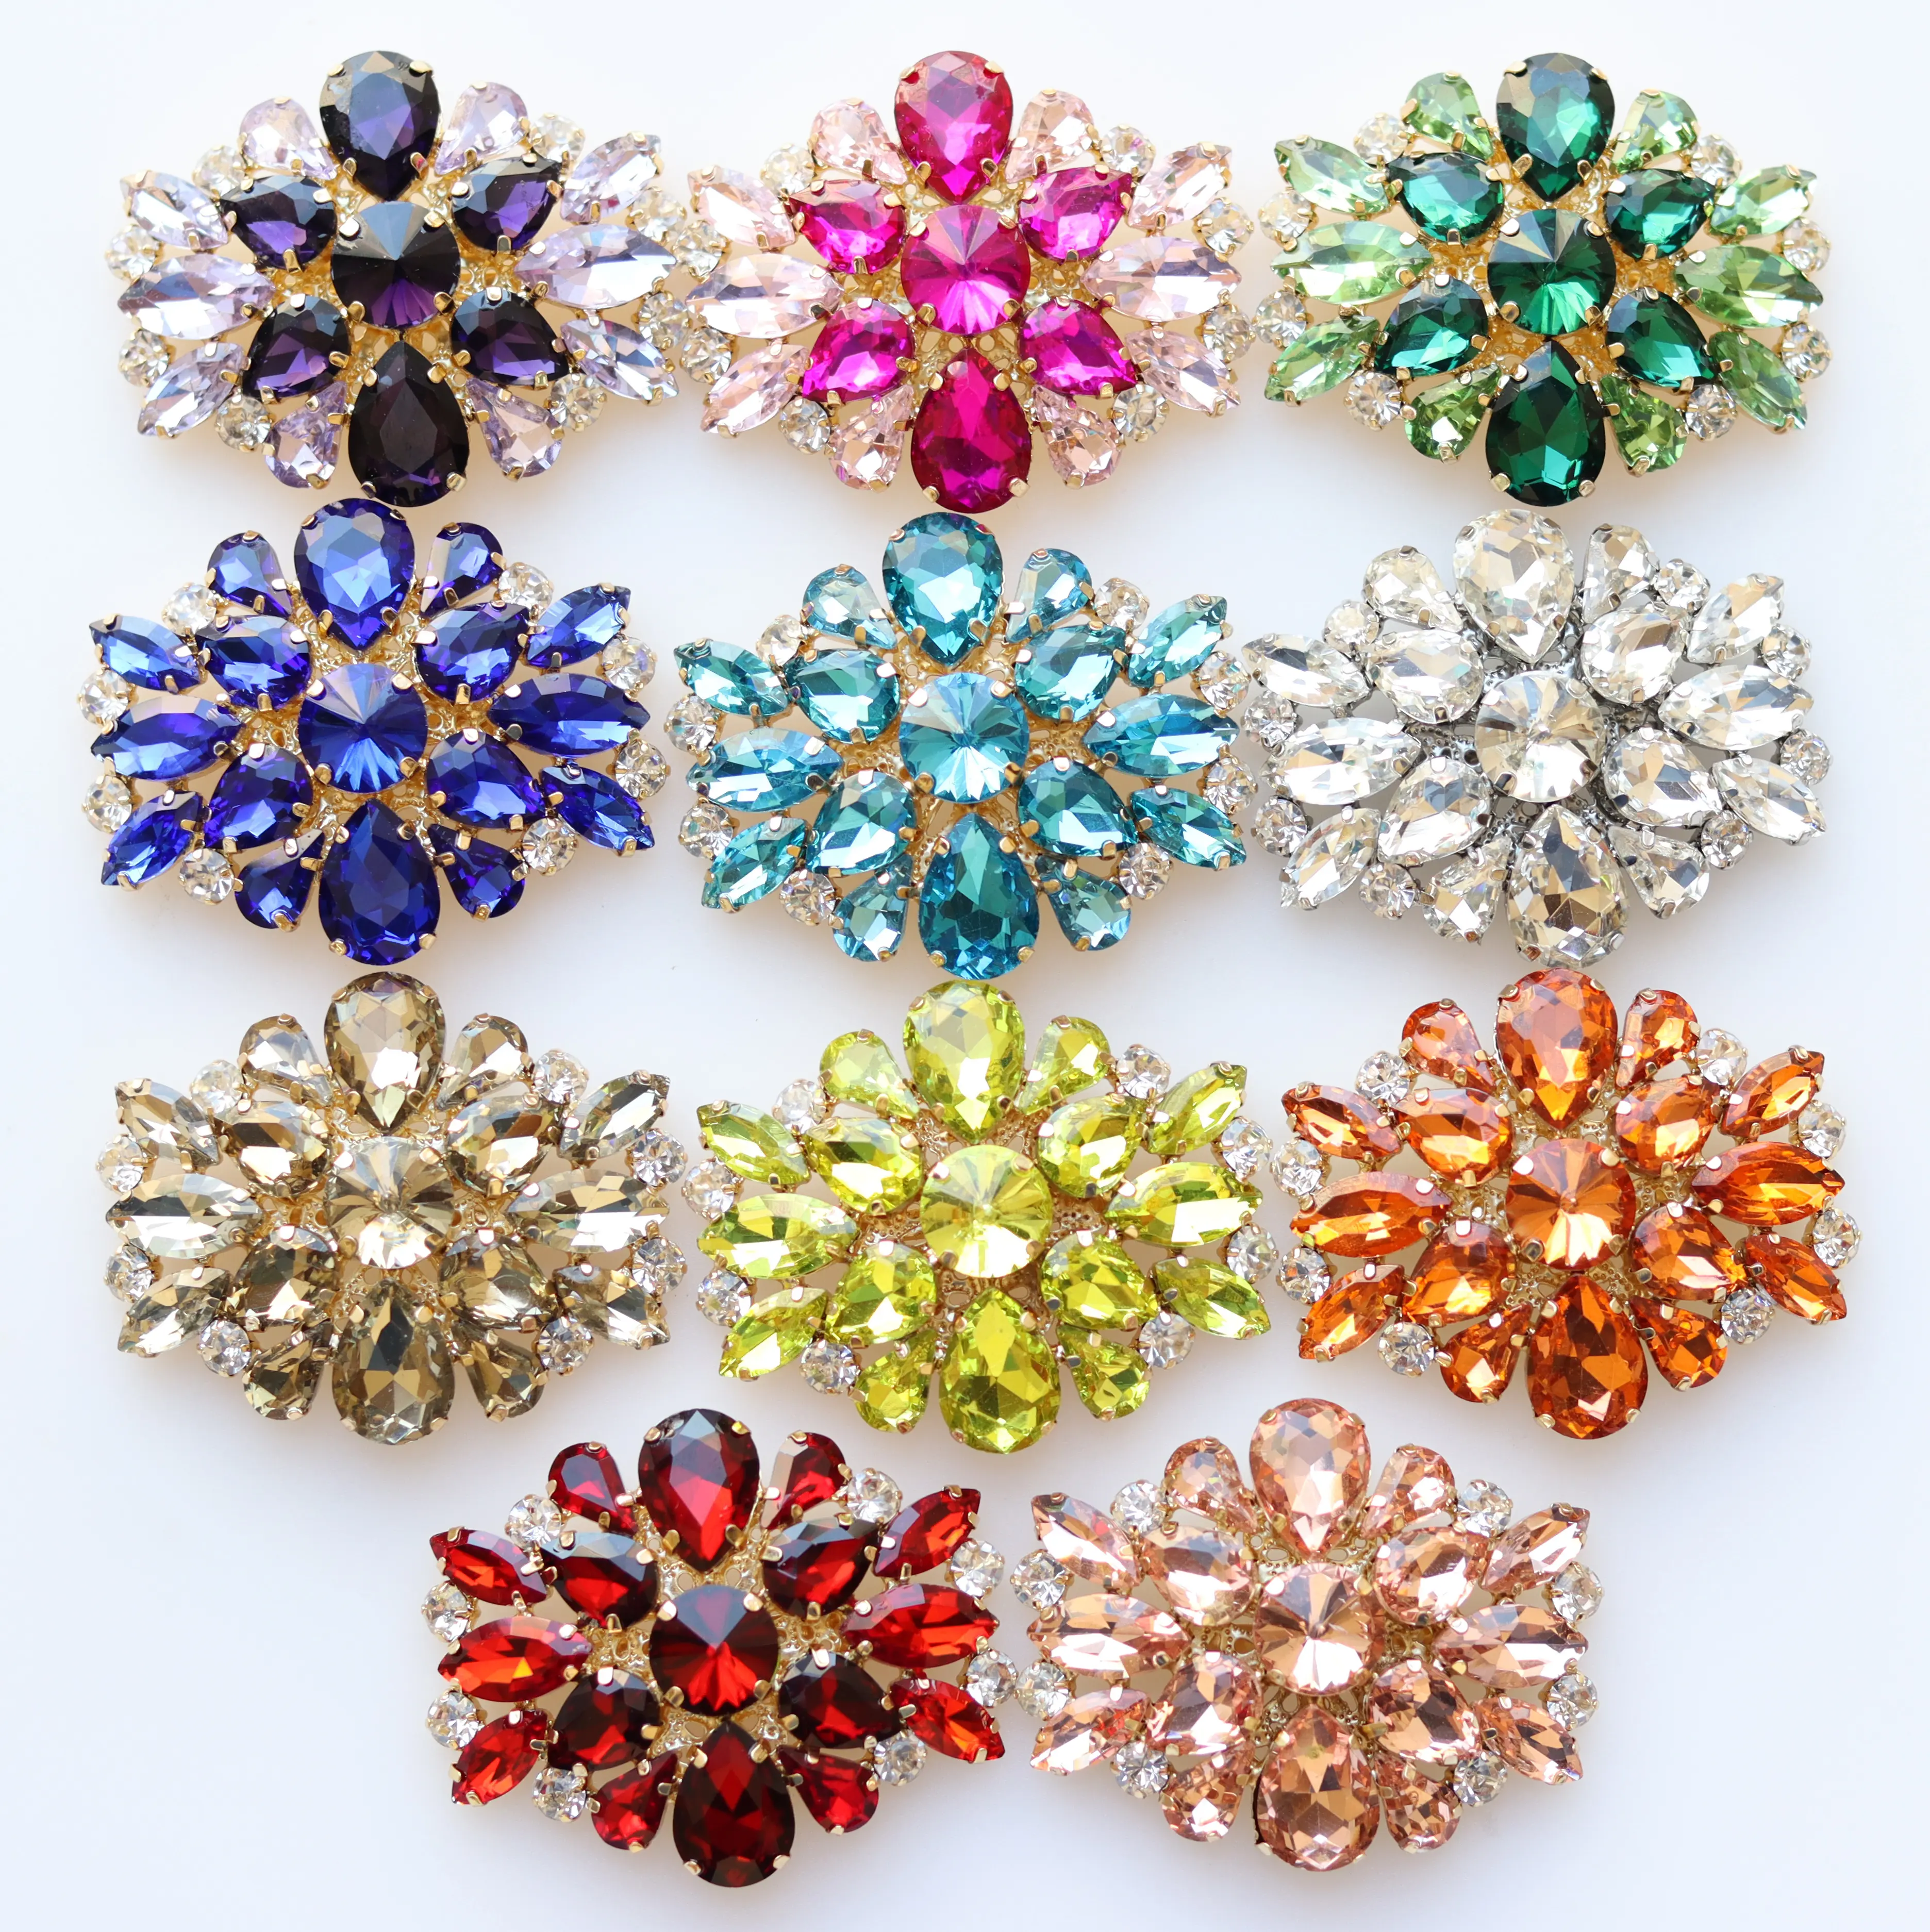 factory new arrival rhinestones glass colorful luxury removable shoe clips decoration accessories bow metal shoe charms